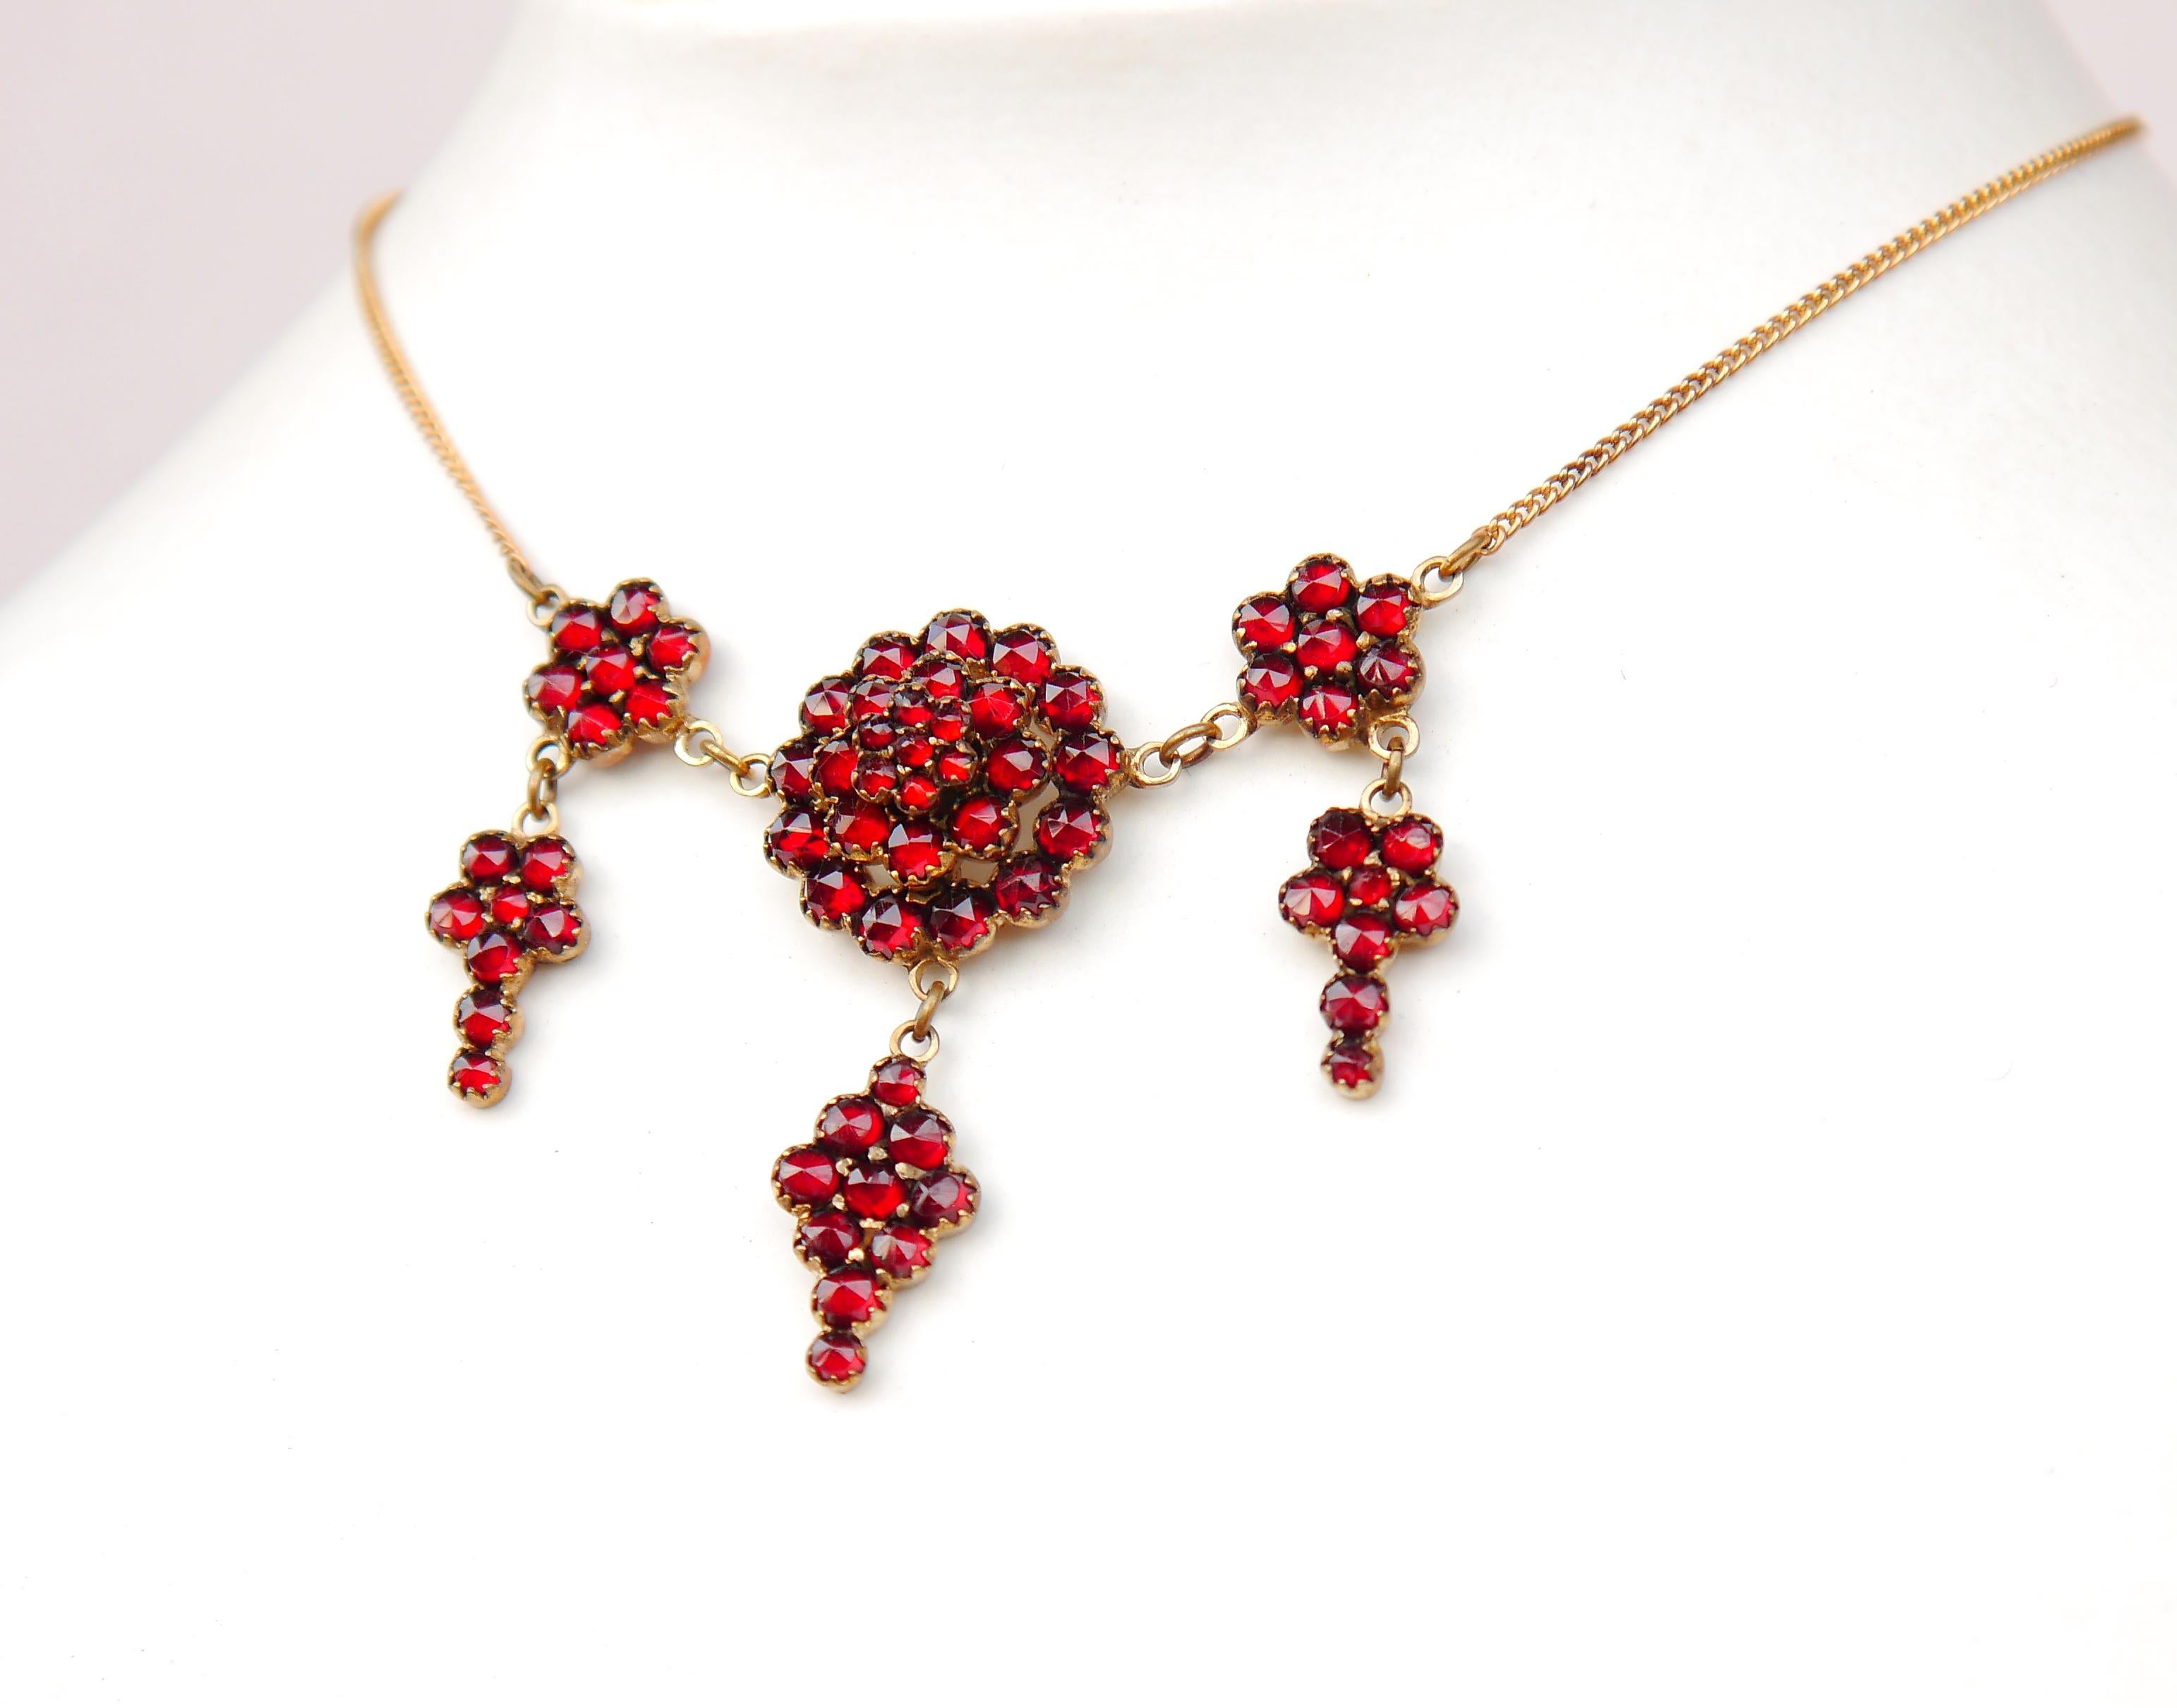 
Austrian or Czechoslovakian Bohemian ca.  1920 - 1930s Garnet Necklace with pendants in Gilt Silver and chain in solid 18K Yellow Gold. No markings on pendant. Chain hallmarked 18K.

Plenty rose cut red garnet stones of gradual diameters. The